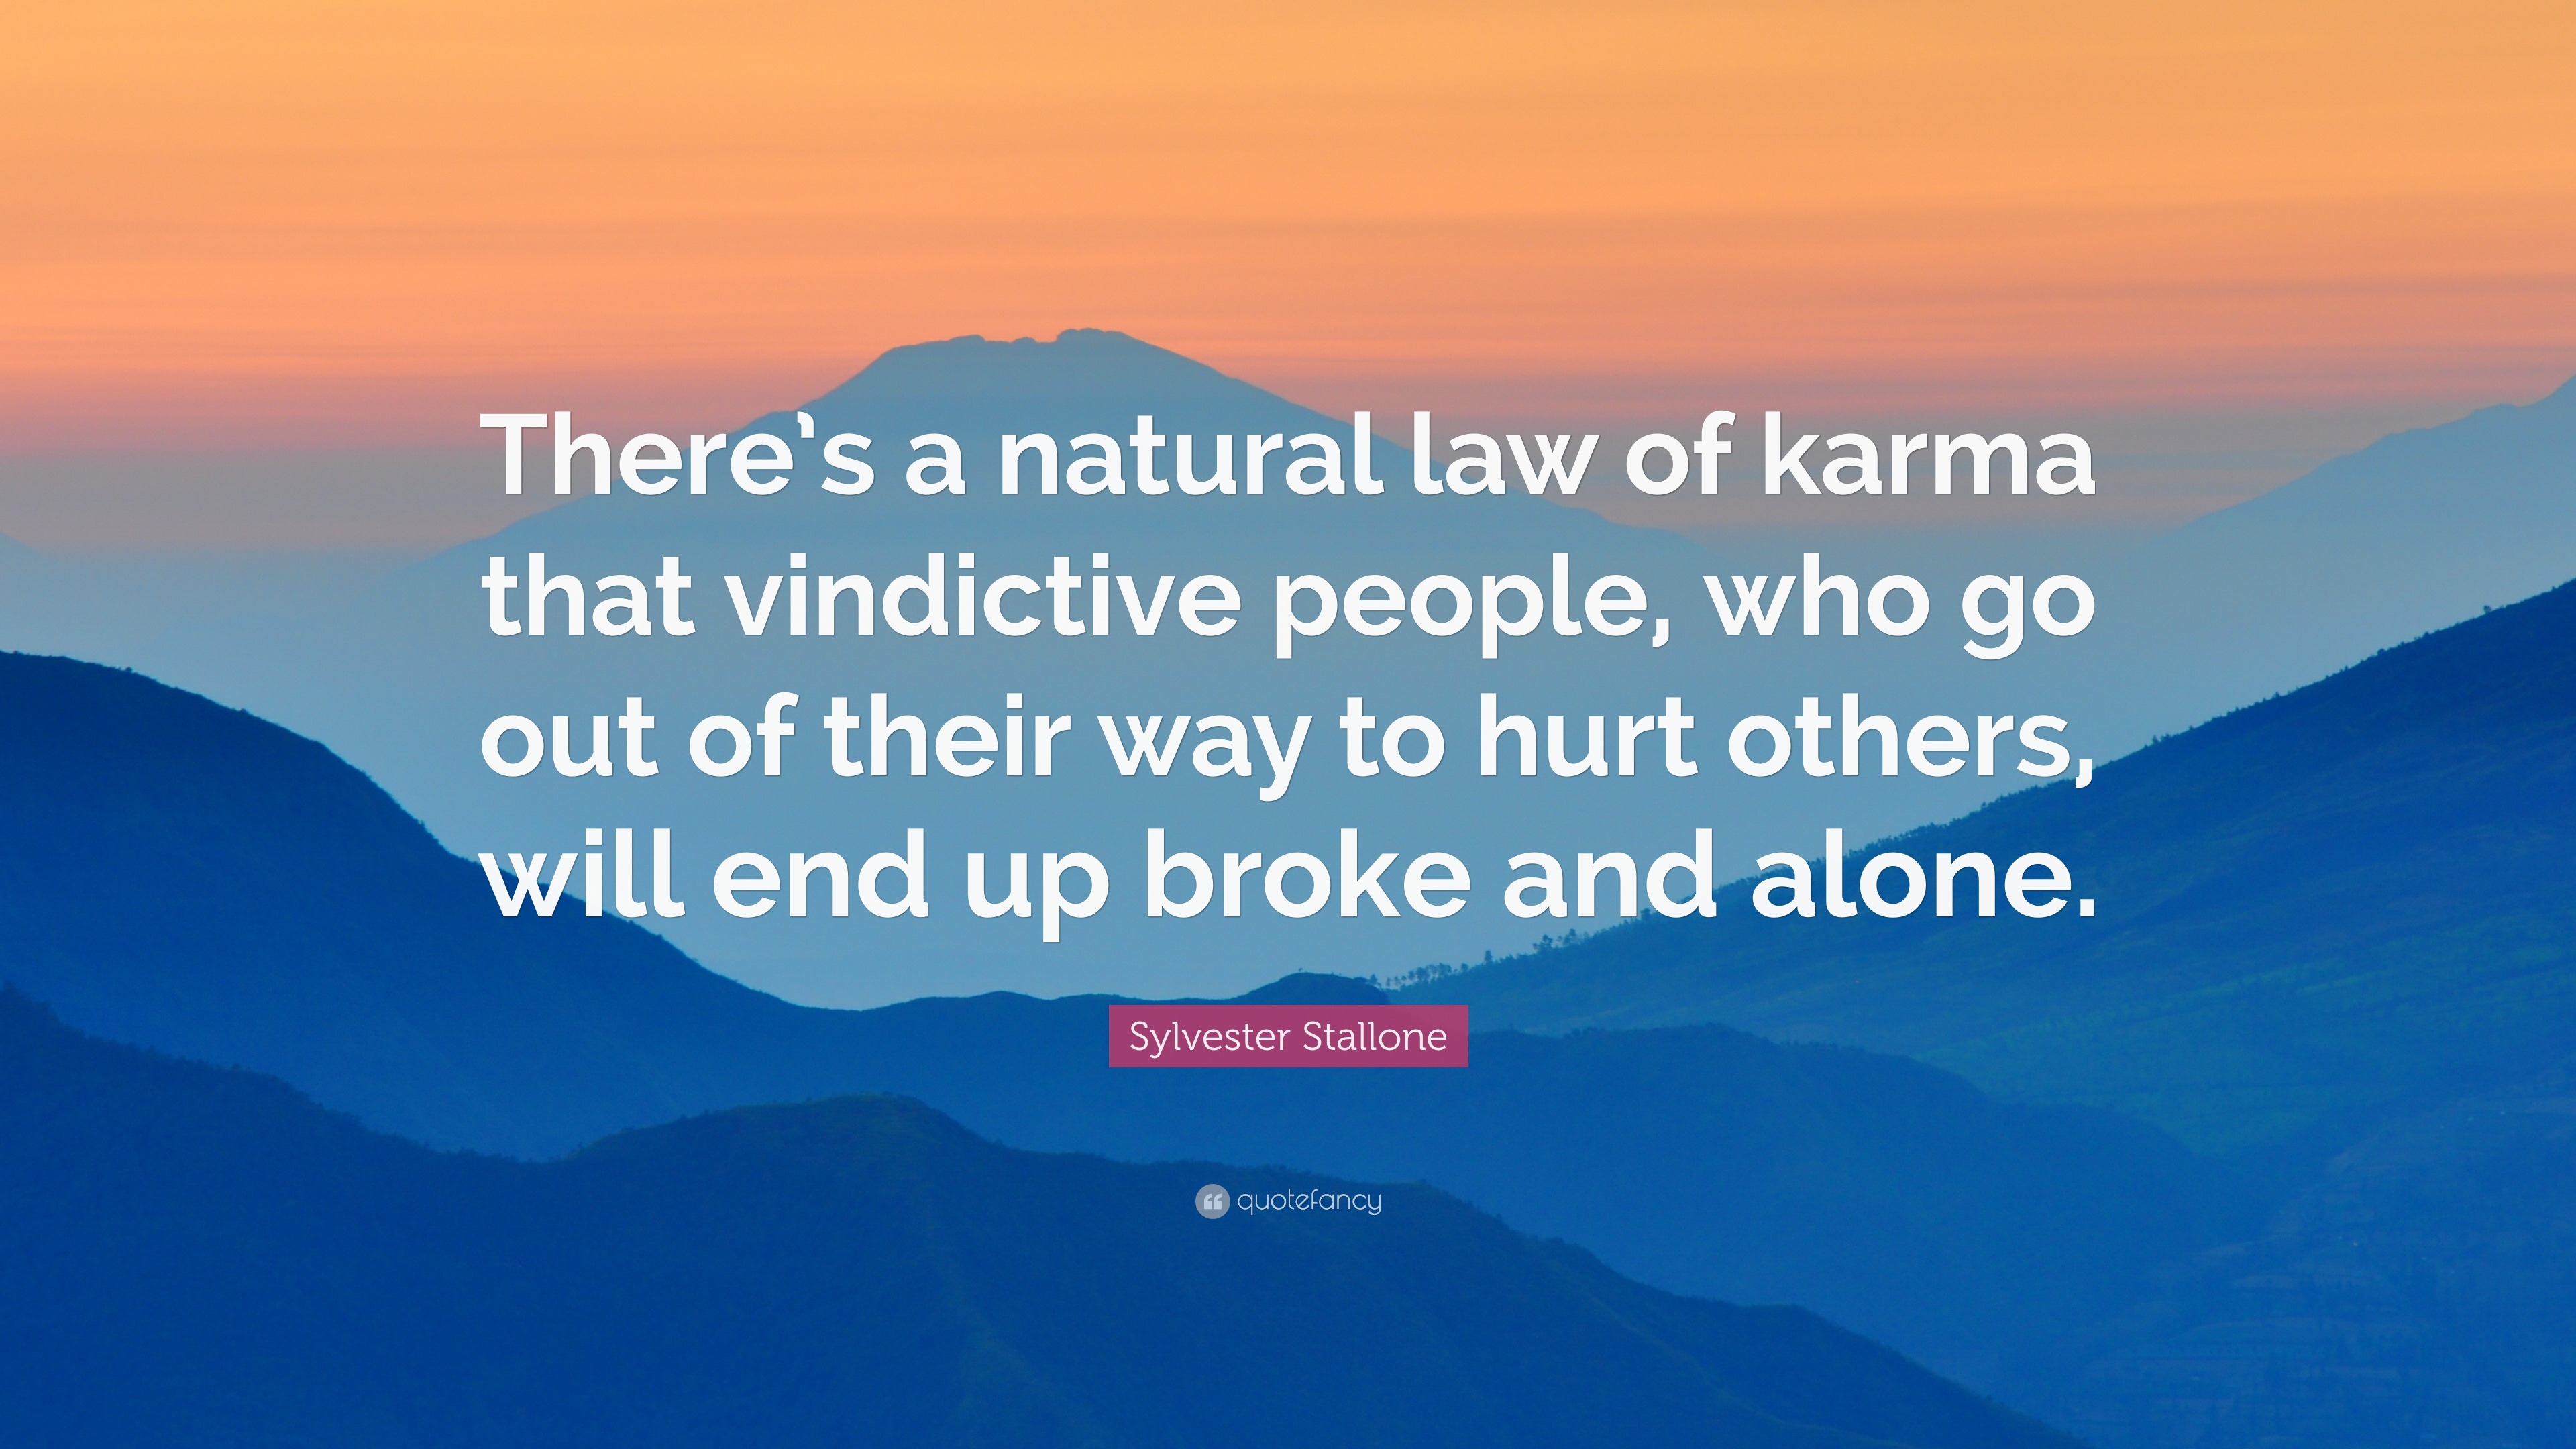 Sylvester Stallone Quote: “There’s a natural law of karma that